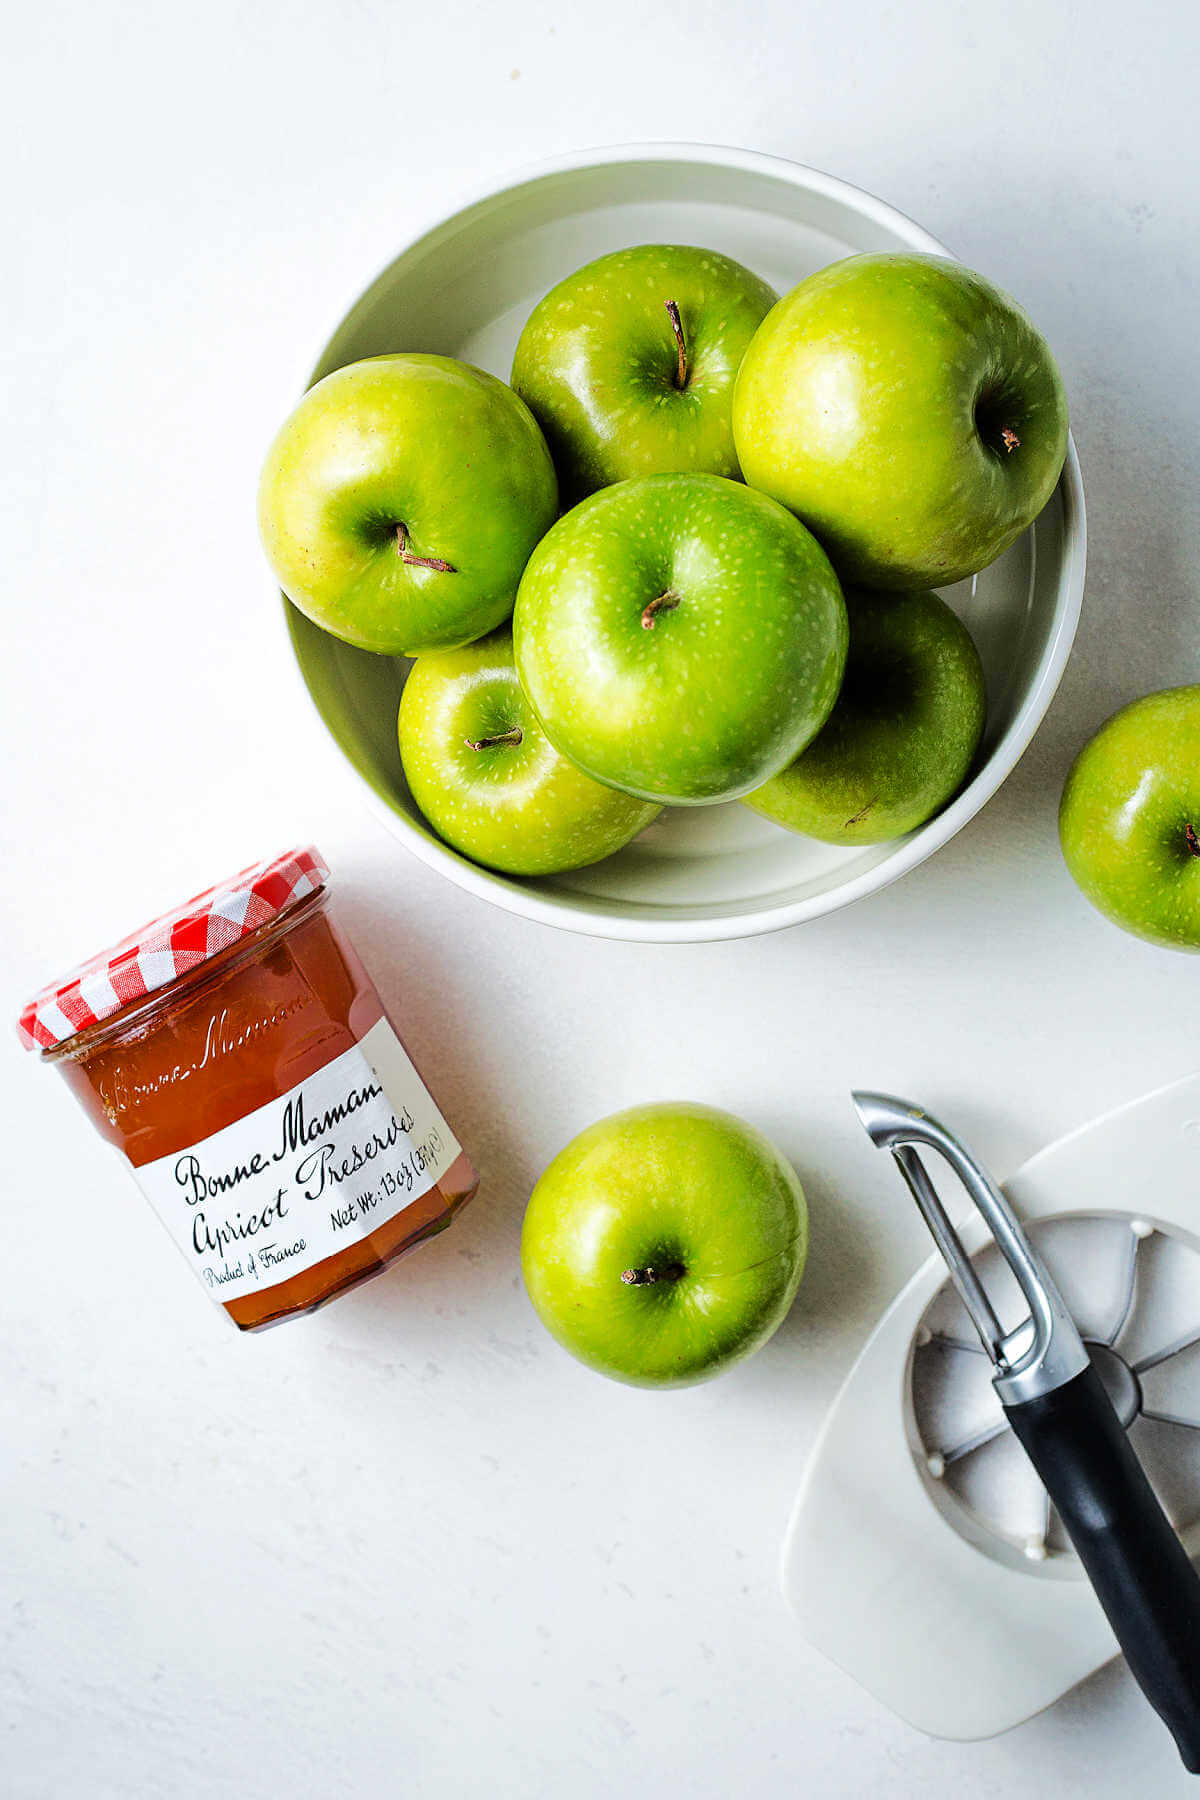 a bowl of Granny Smith apples and a jar of apricot jam on a table.